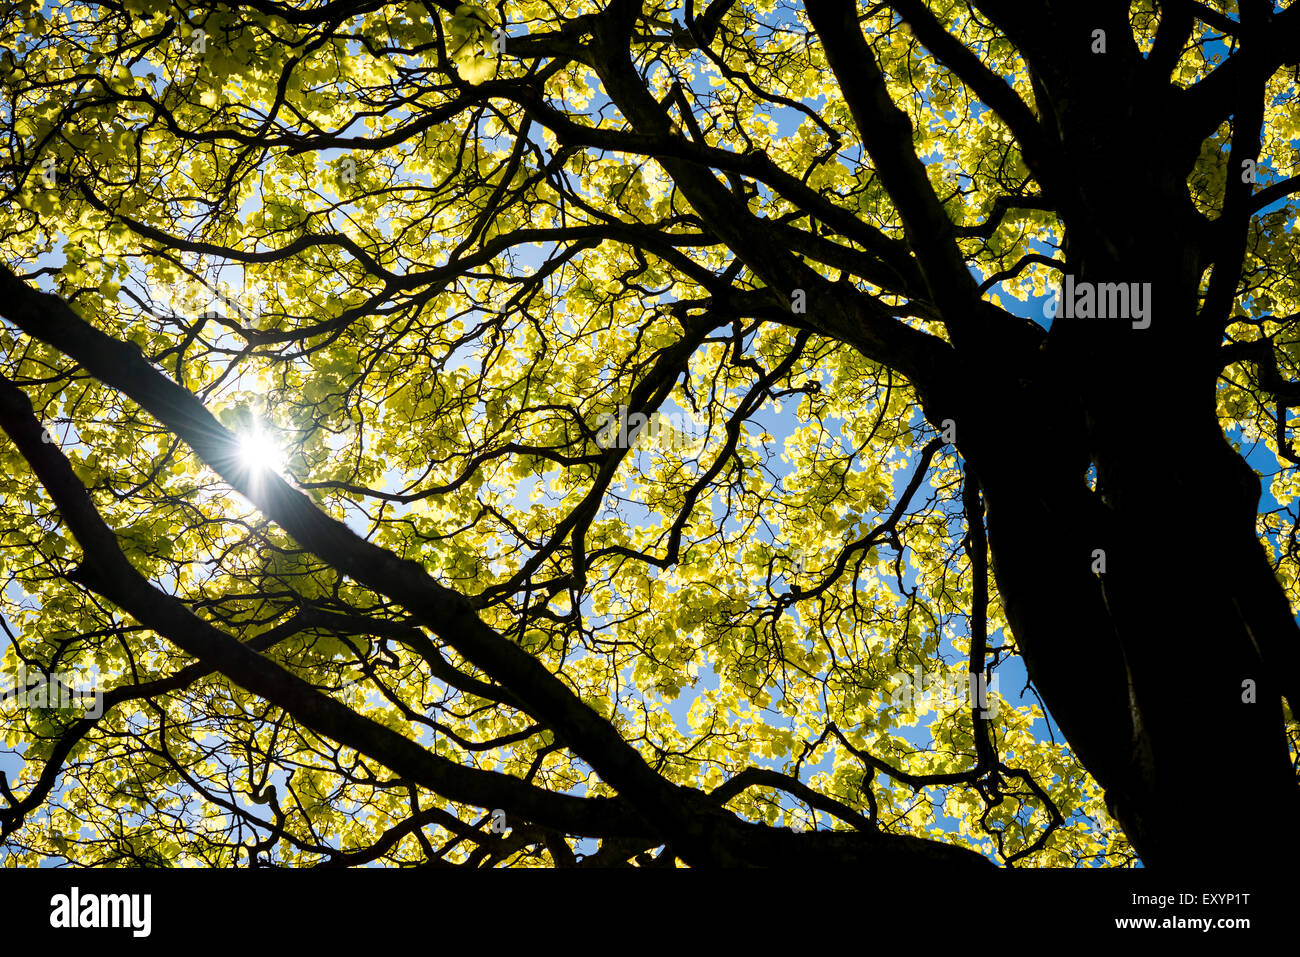 Looking up into the branches of an Acer tree with dark branches and bright yellow new foliage. Stock Photo